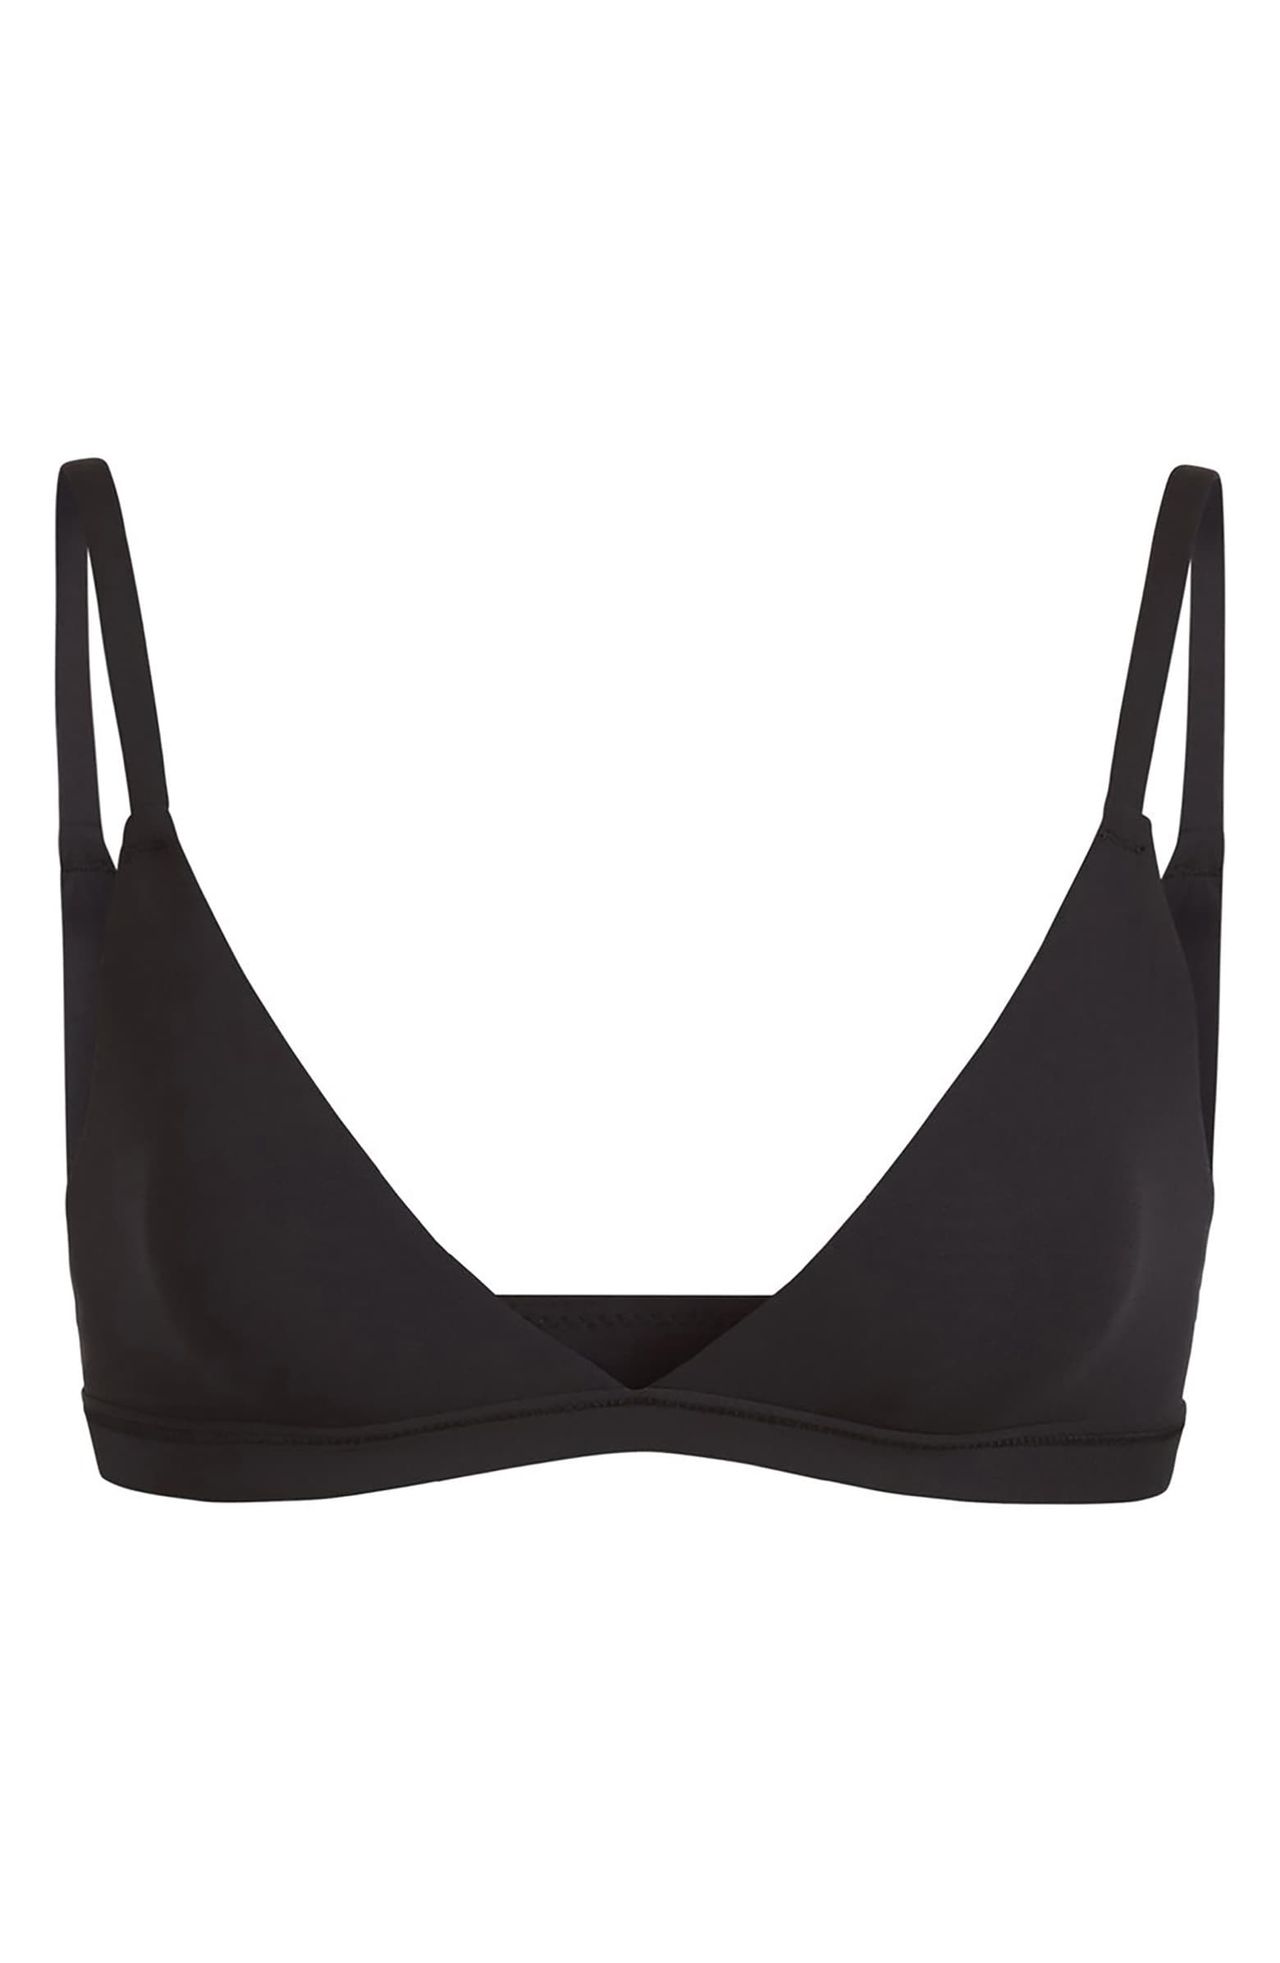 The 11 Best Bras for Small Busts | Who What Wear